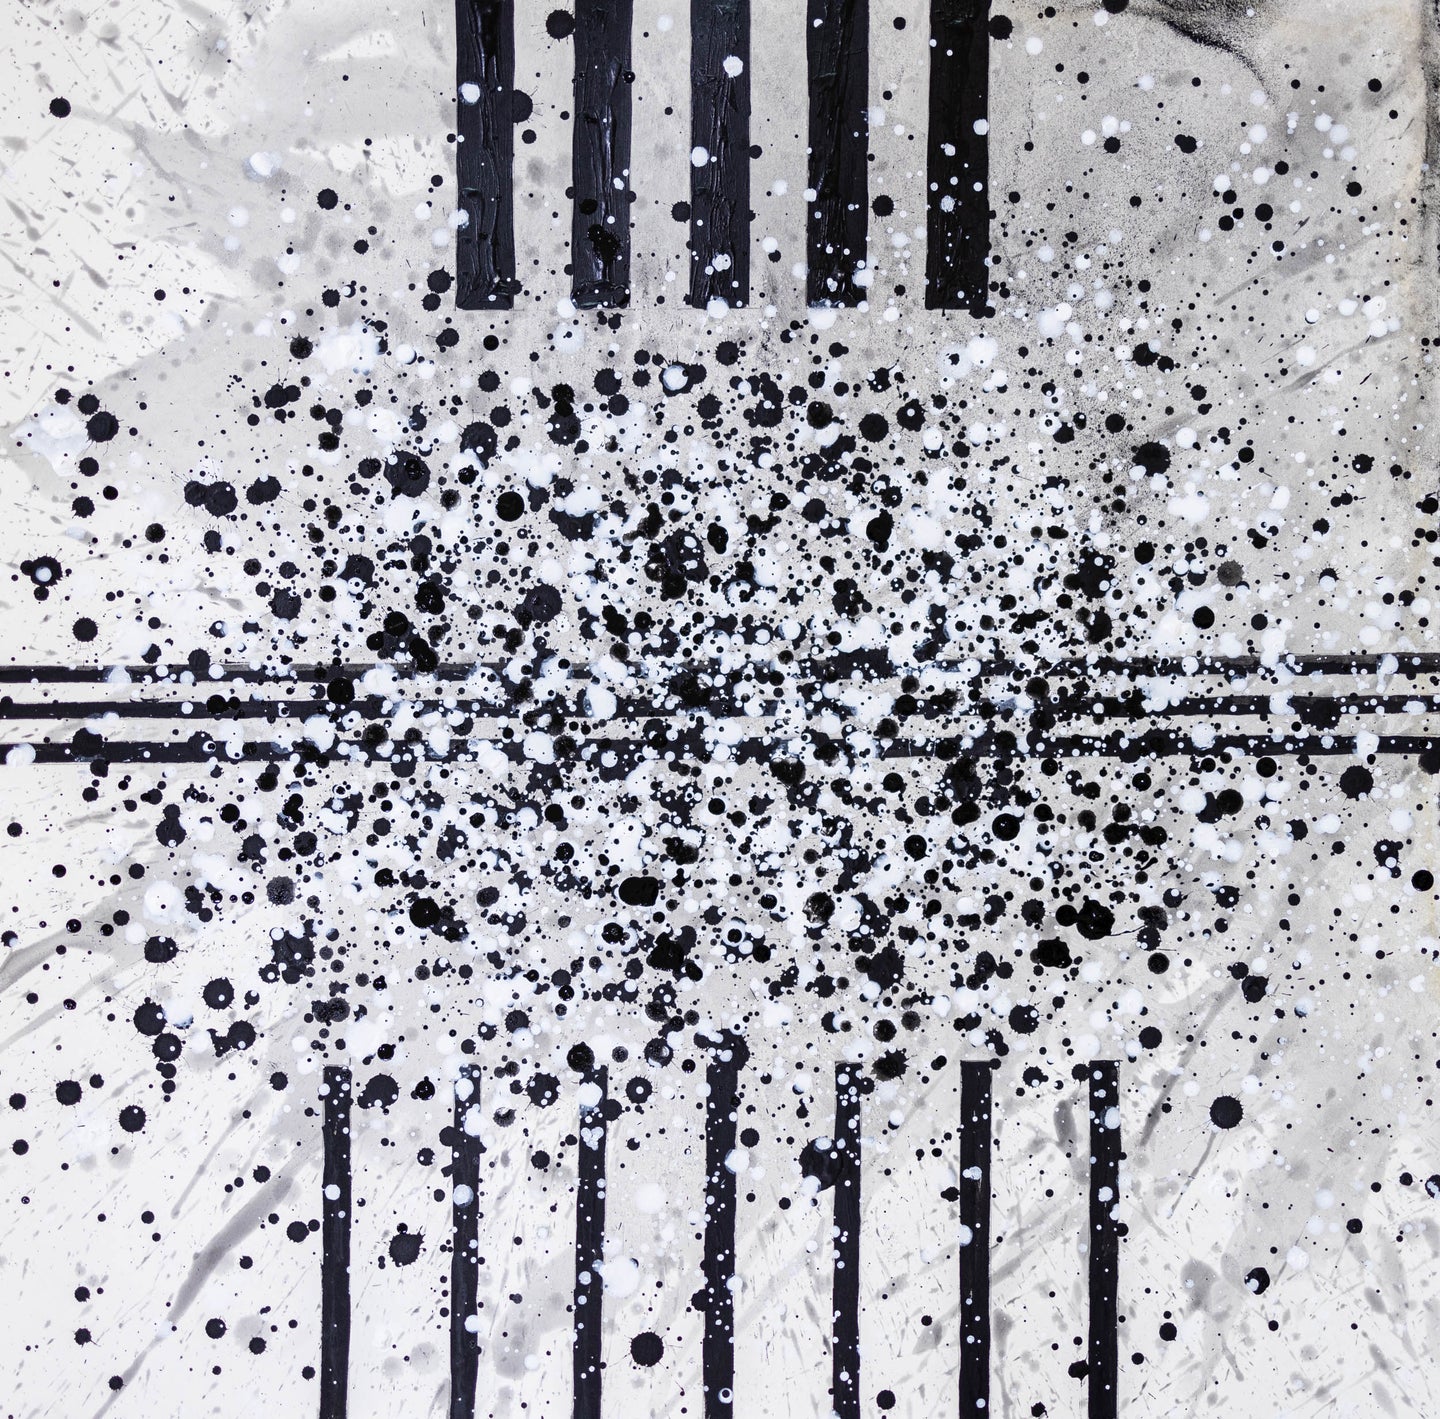 J. Steven Manolis, South Pointe Park (Black & White) 6 2021, watercolor, acrylic and latex enamel on paper, 18 x 18 inches, black and white abstract art